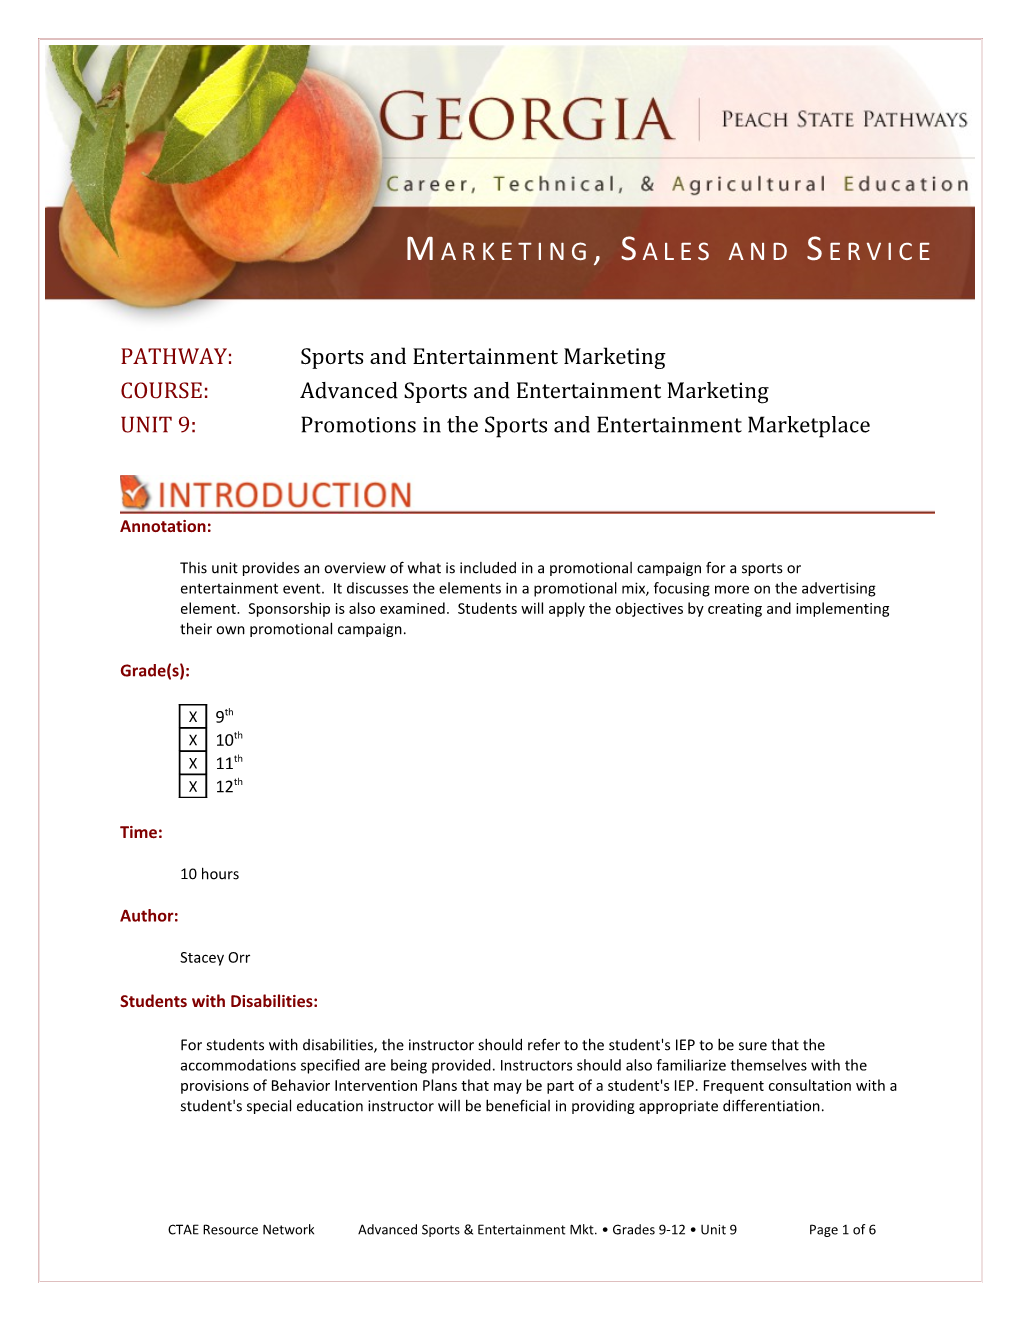 COURSE: Advanced Sports and Entertainment Marketing